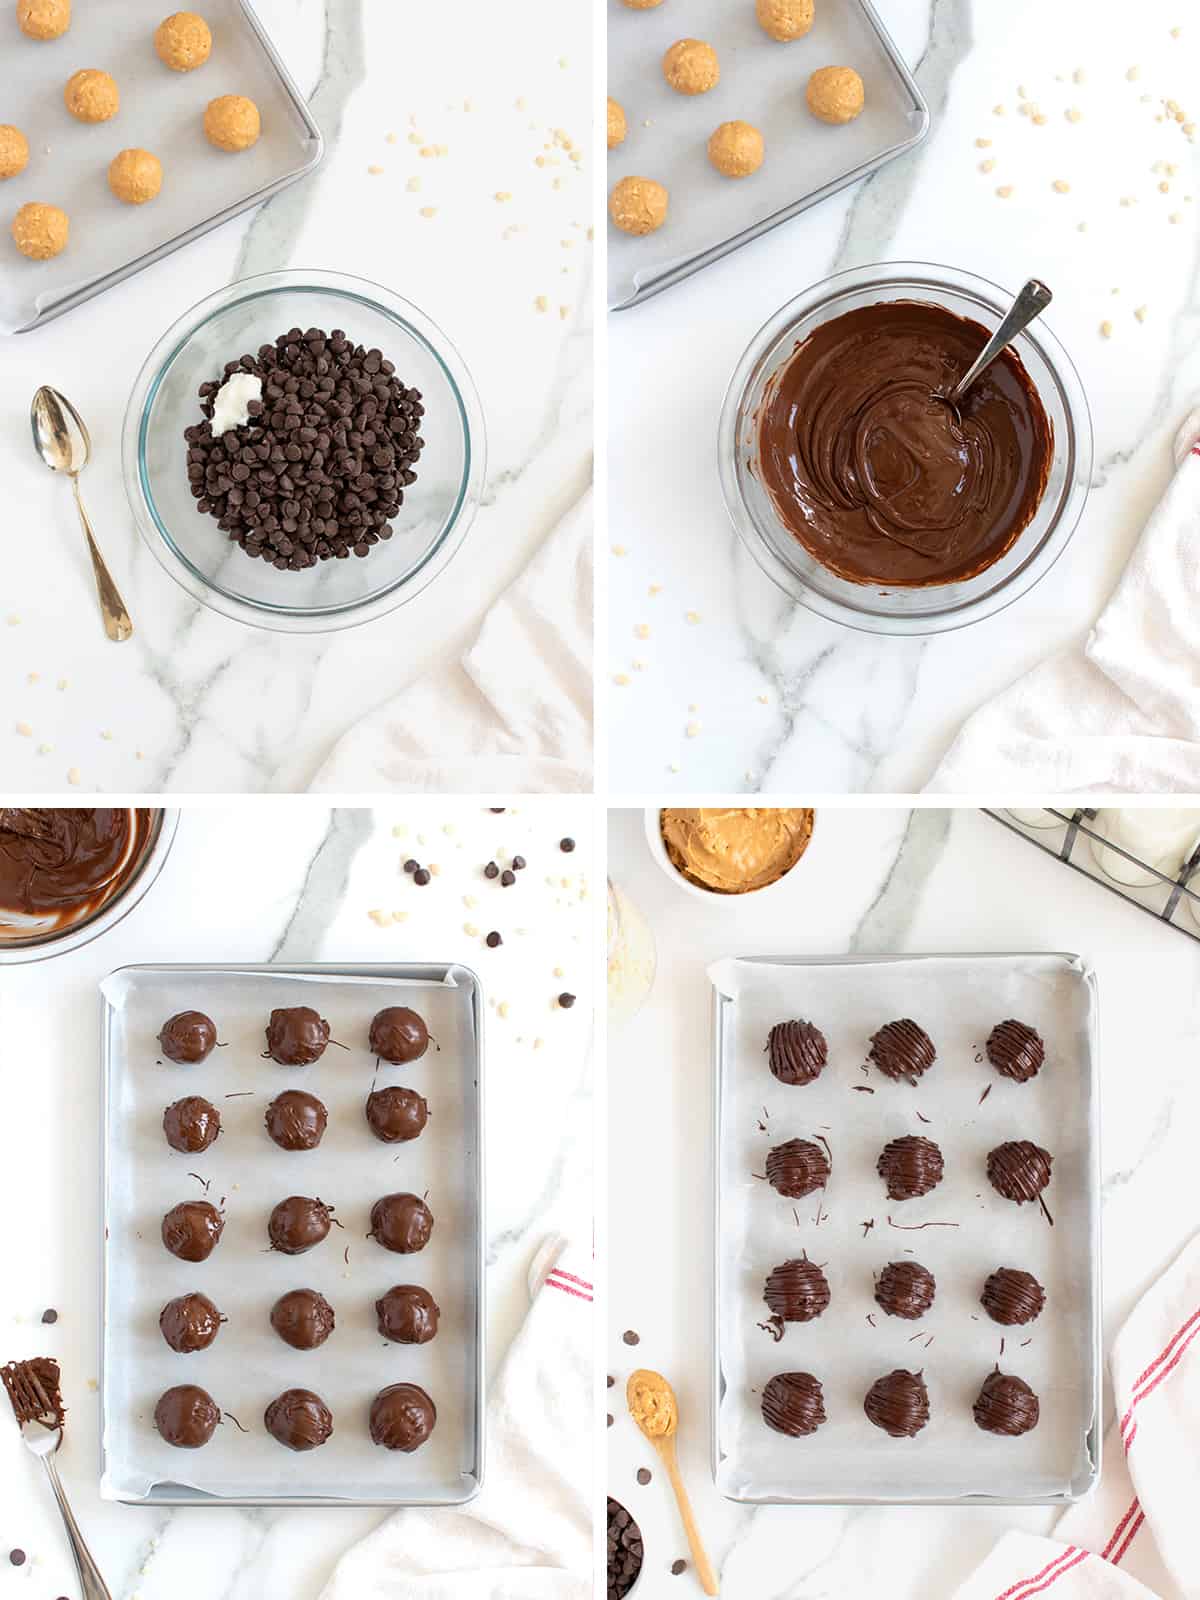 Chocolate Peanut Butter Balls by The BakerMama